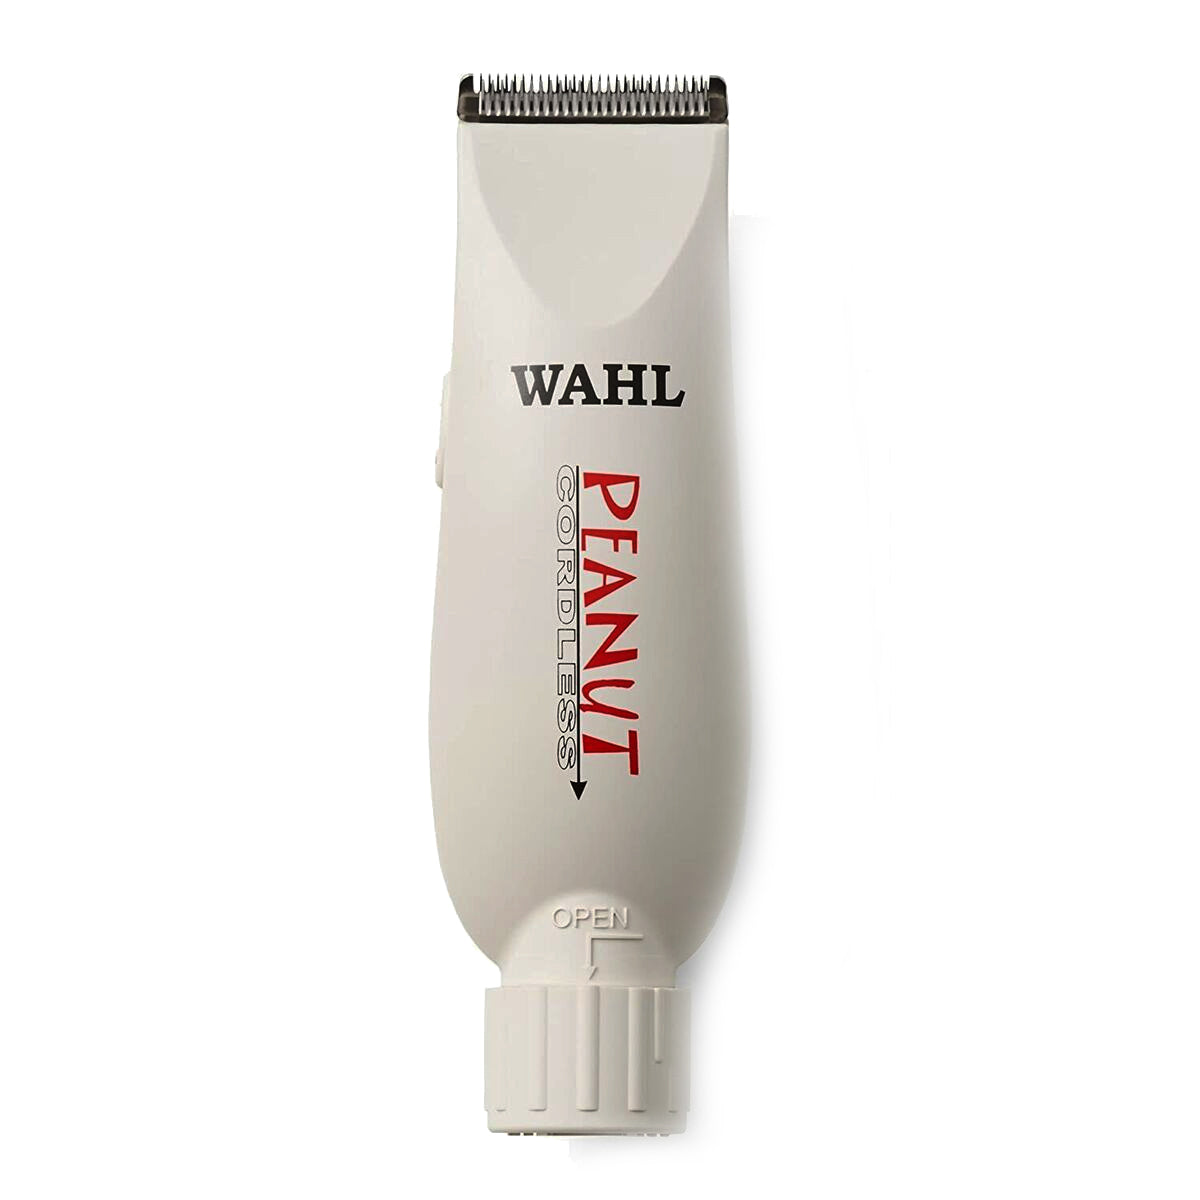 Wahl Professional Cordless Peanut Trimmer #8663